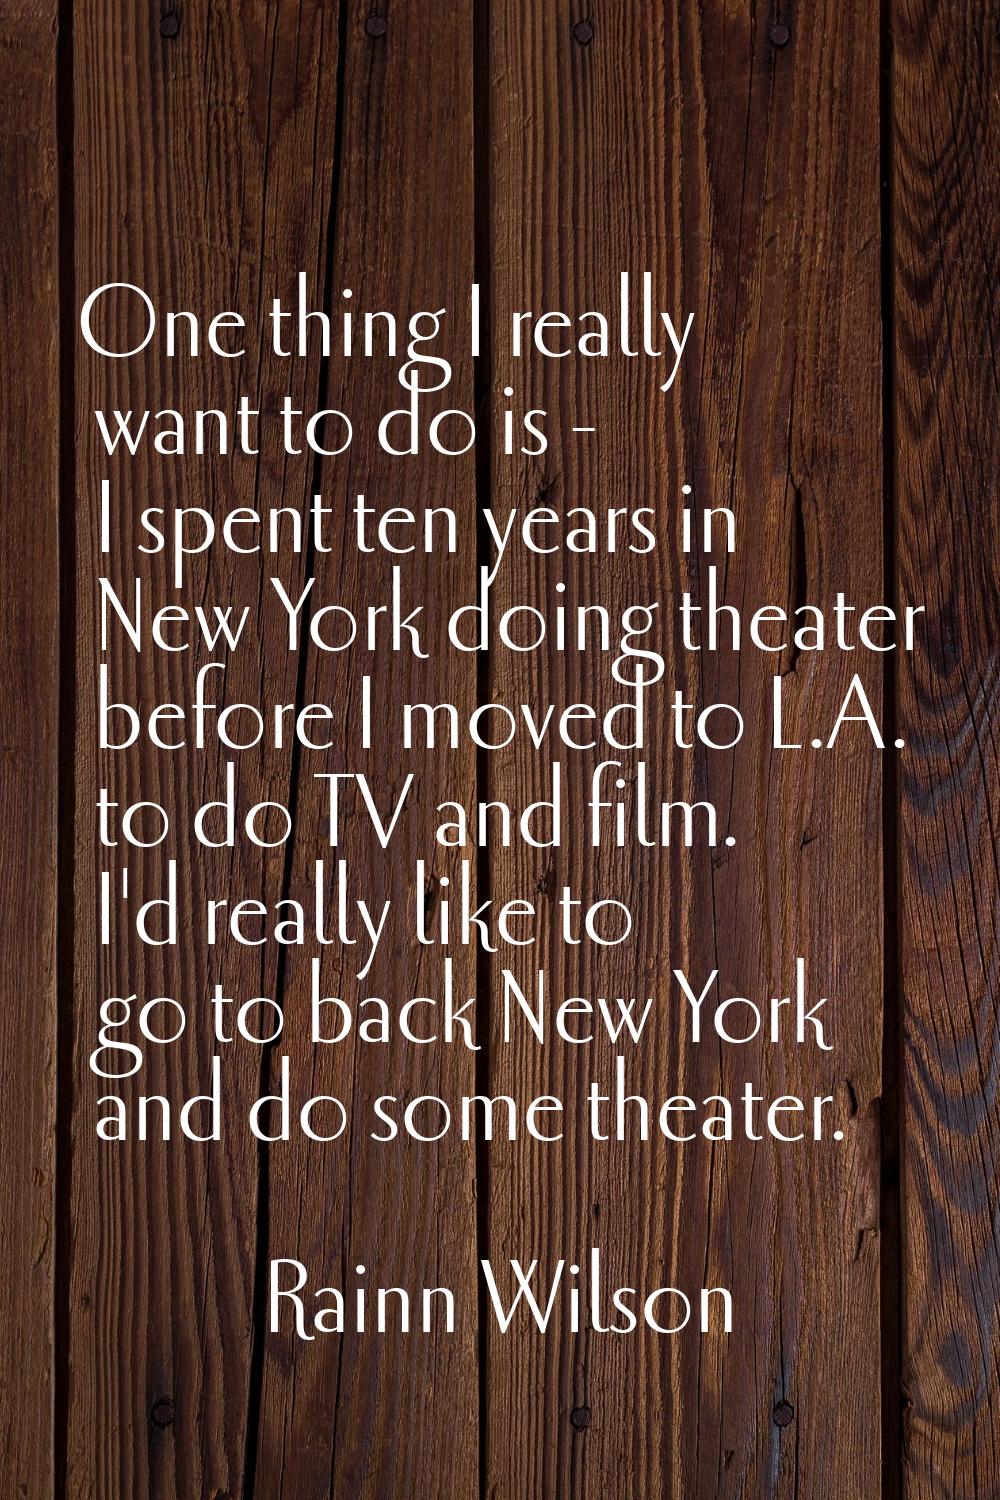 One thing I really want to do is - I spent ten years in New York doing theater before I moved to L.